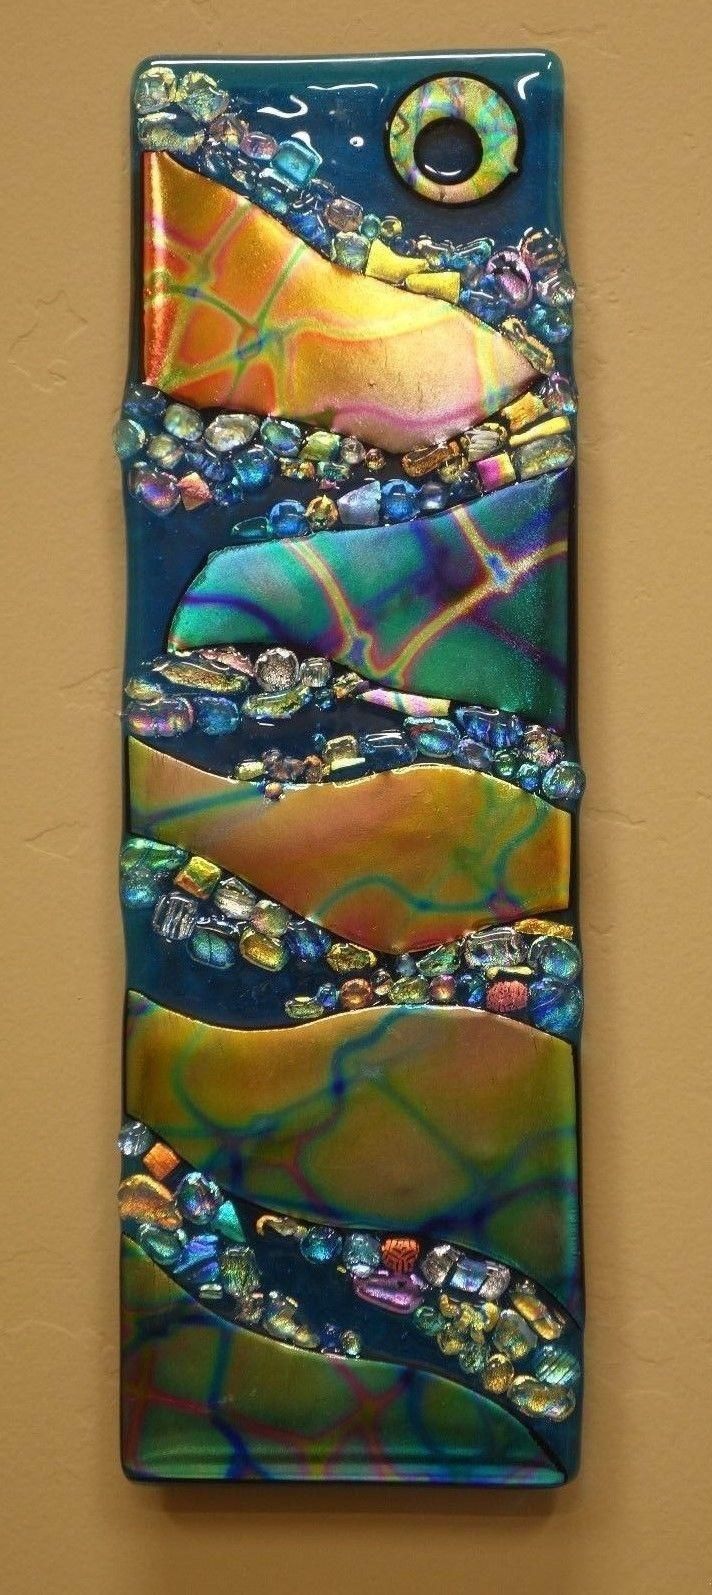 1599 Best Fusing Images On Pinterest | Fused Glass, Glass Art And Inside Cheap Fused Glass Wall Art (View 13 of 20)